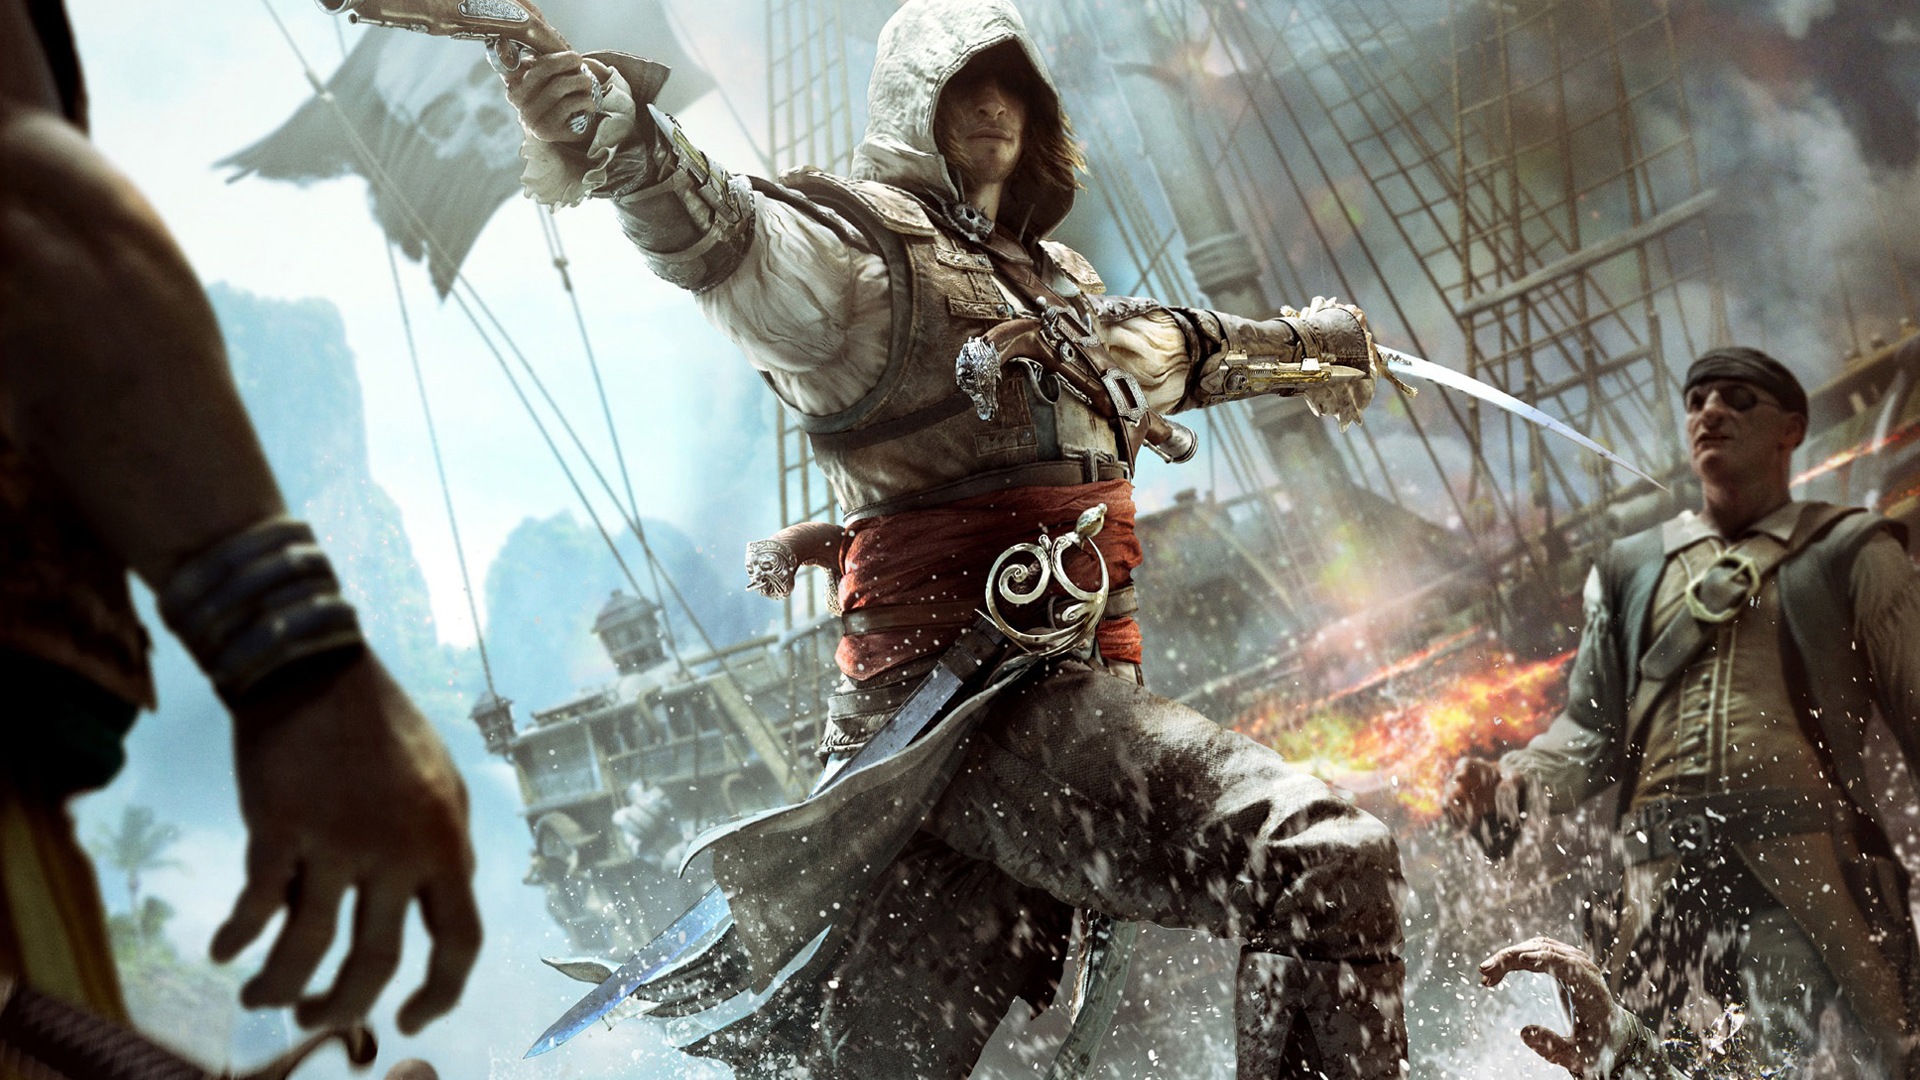 Creed IV Assassin: Black Flag HD wallpapers #6 - 1920x1080